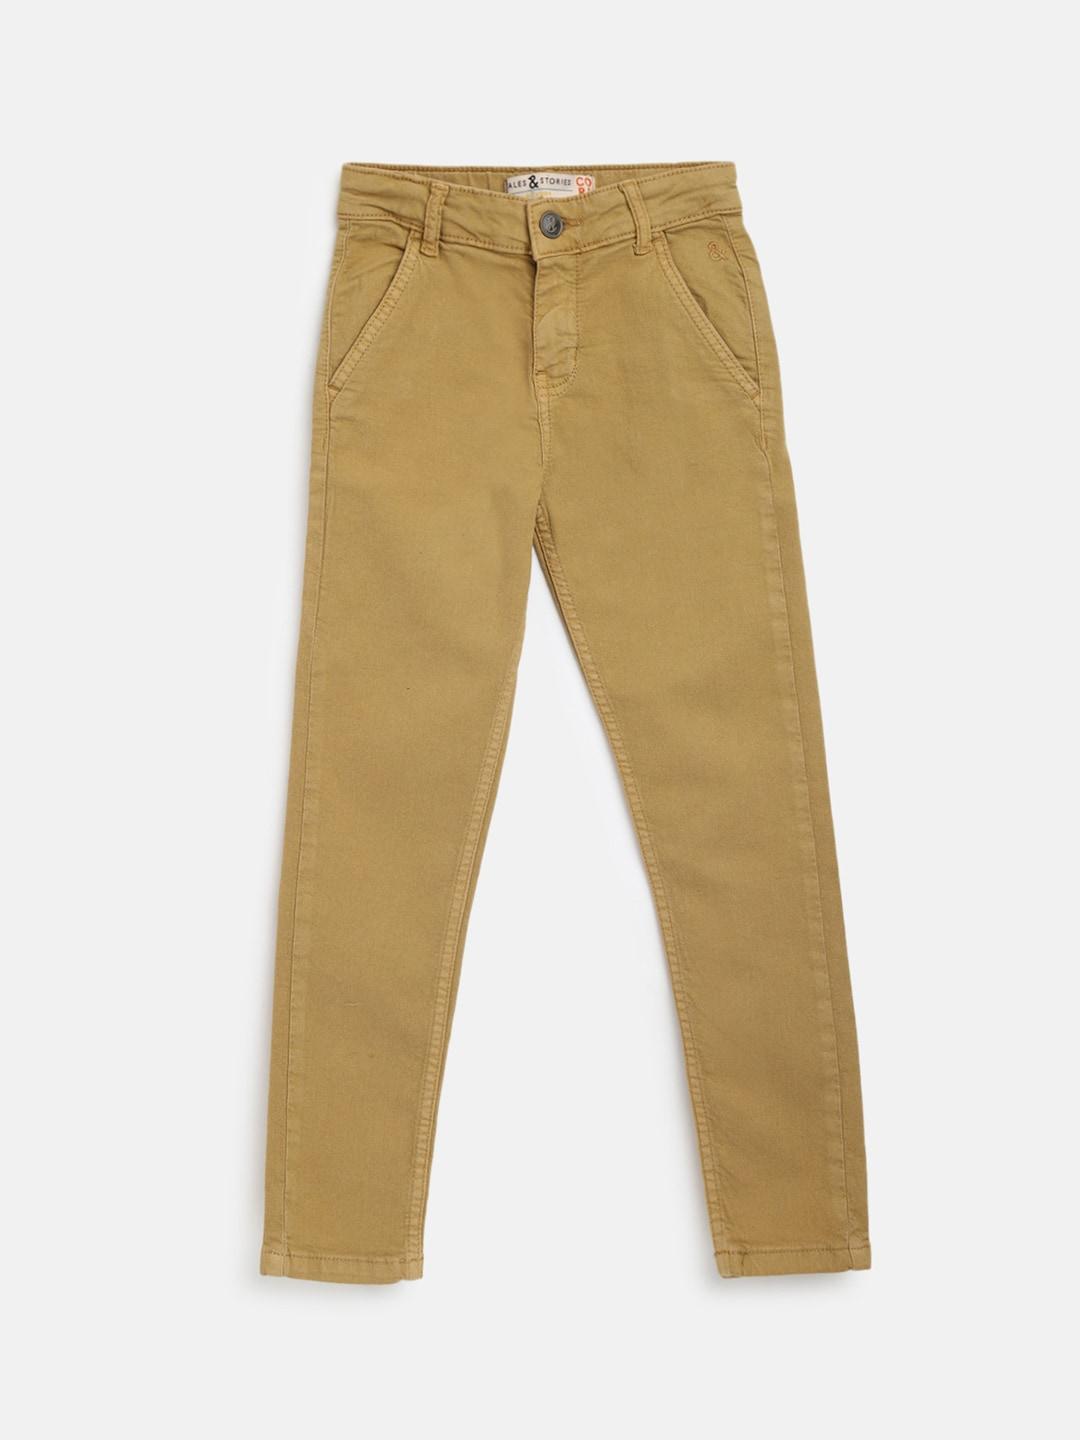 TALES & STORIES Boys Slim Fit Chino Trousers